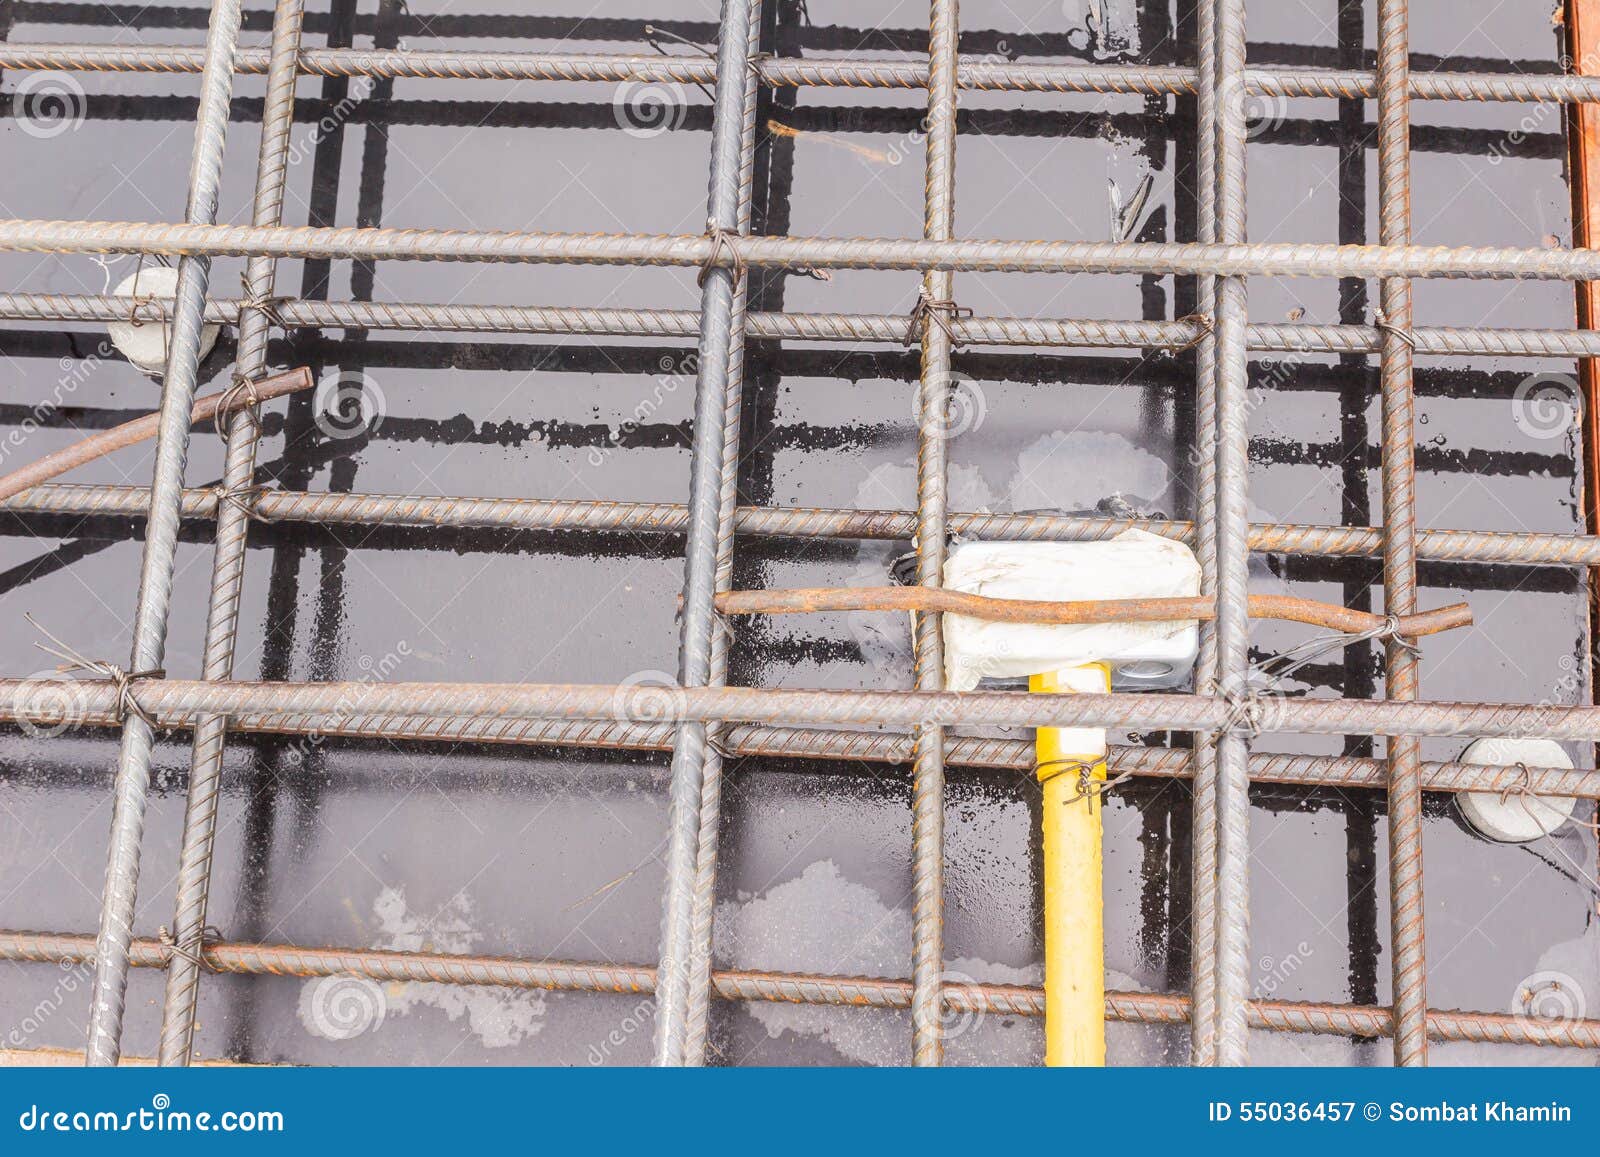 Construction Details Electrical Box In Reinforcement Bar Of Slab Before Pouring Concrete Stock Image Image Of Reinforcement Site